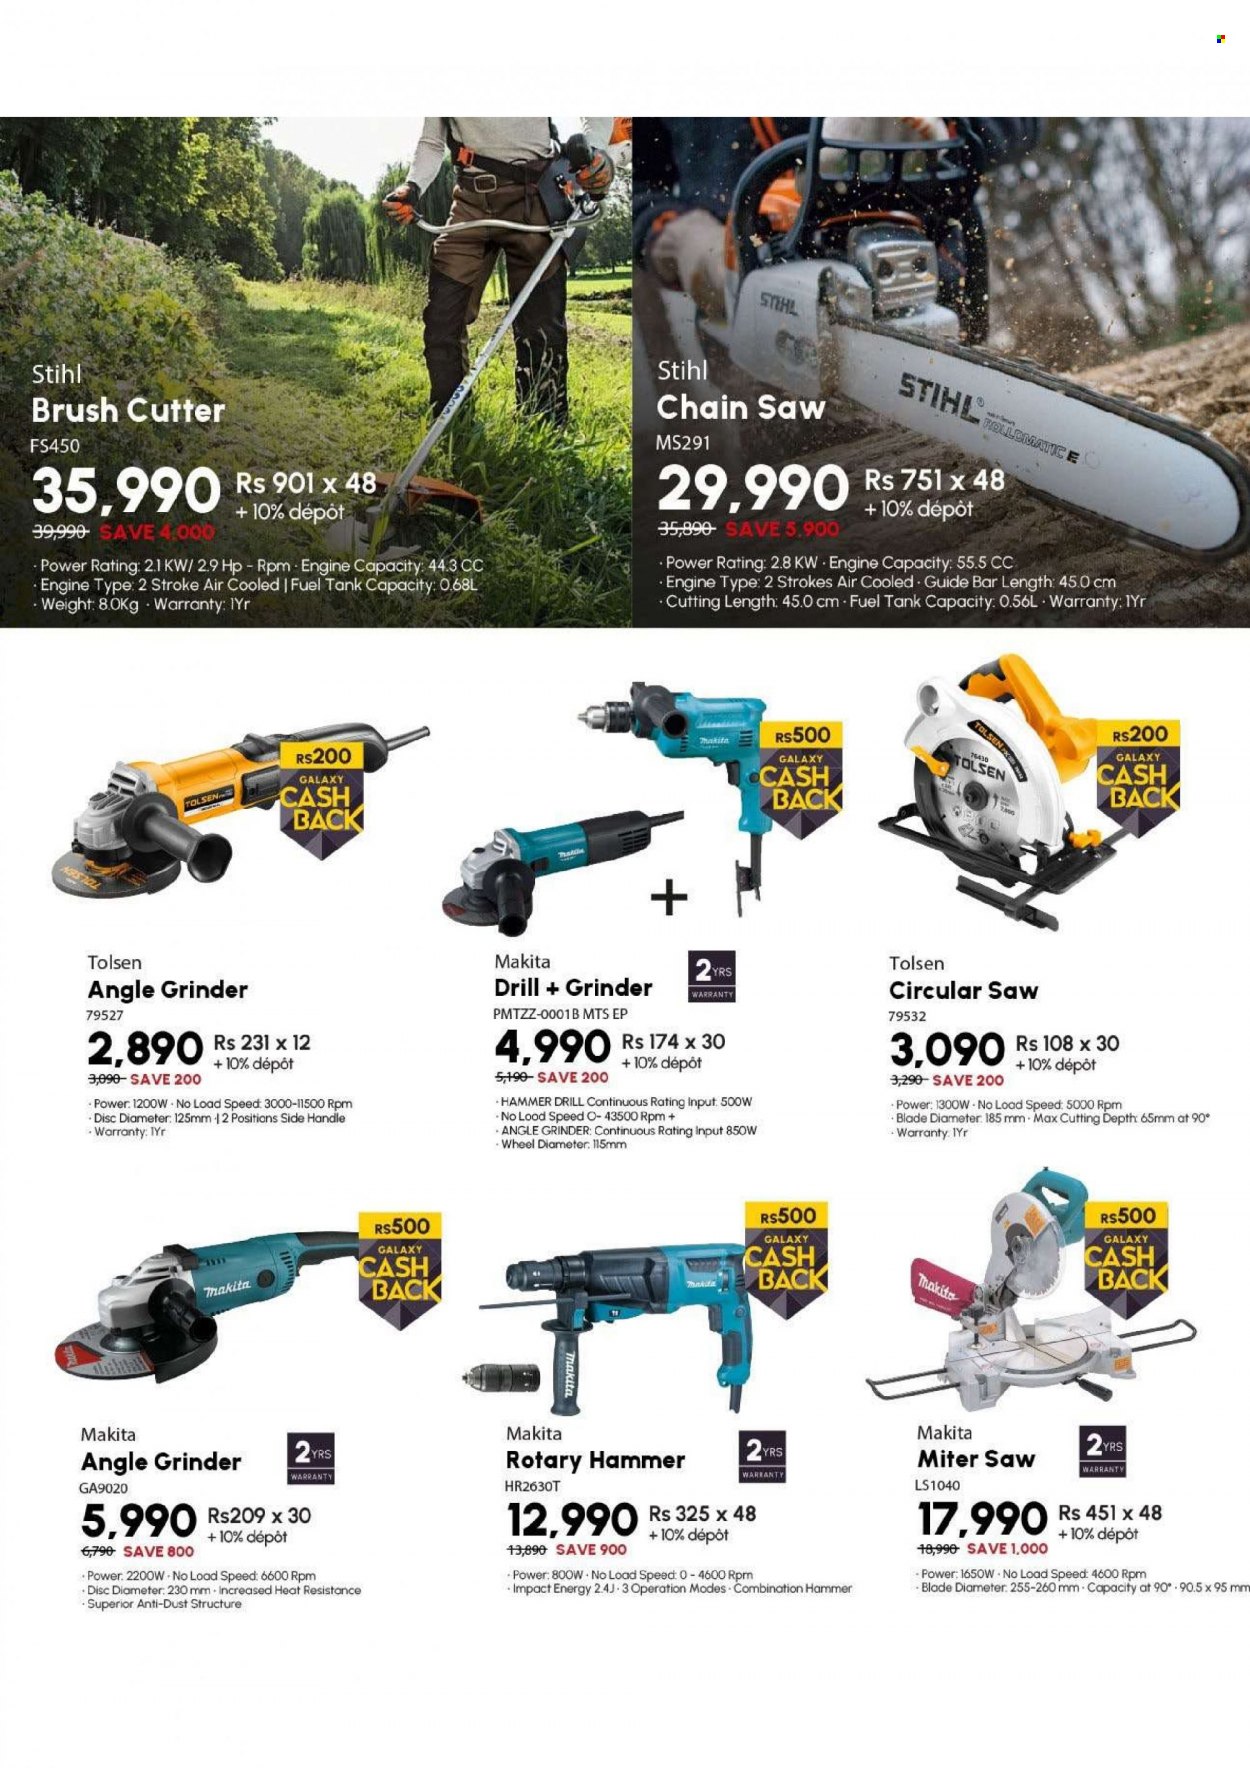 Galaxy Catalogue - Sales products - Hewlett Packard, grinder, drill, Makita, chain saw, circular saw, saw, angle grinder, brush cutter, tank. Page 6.